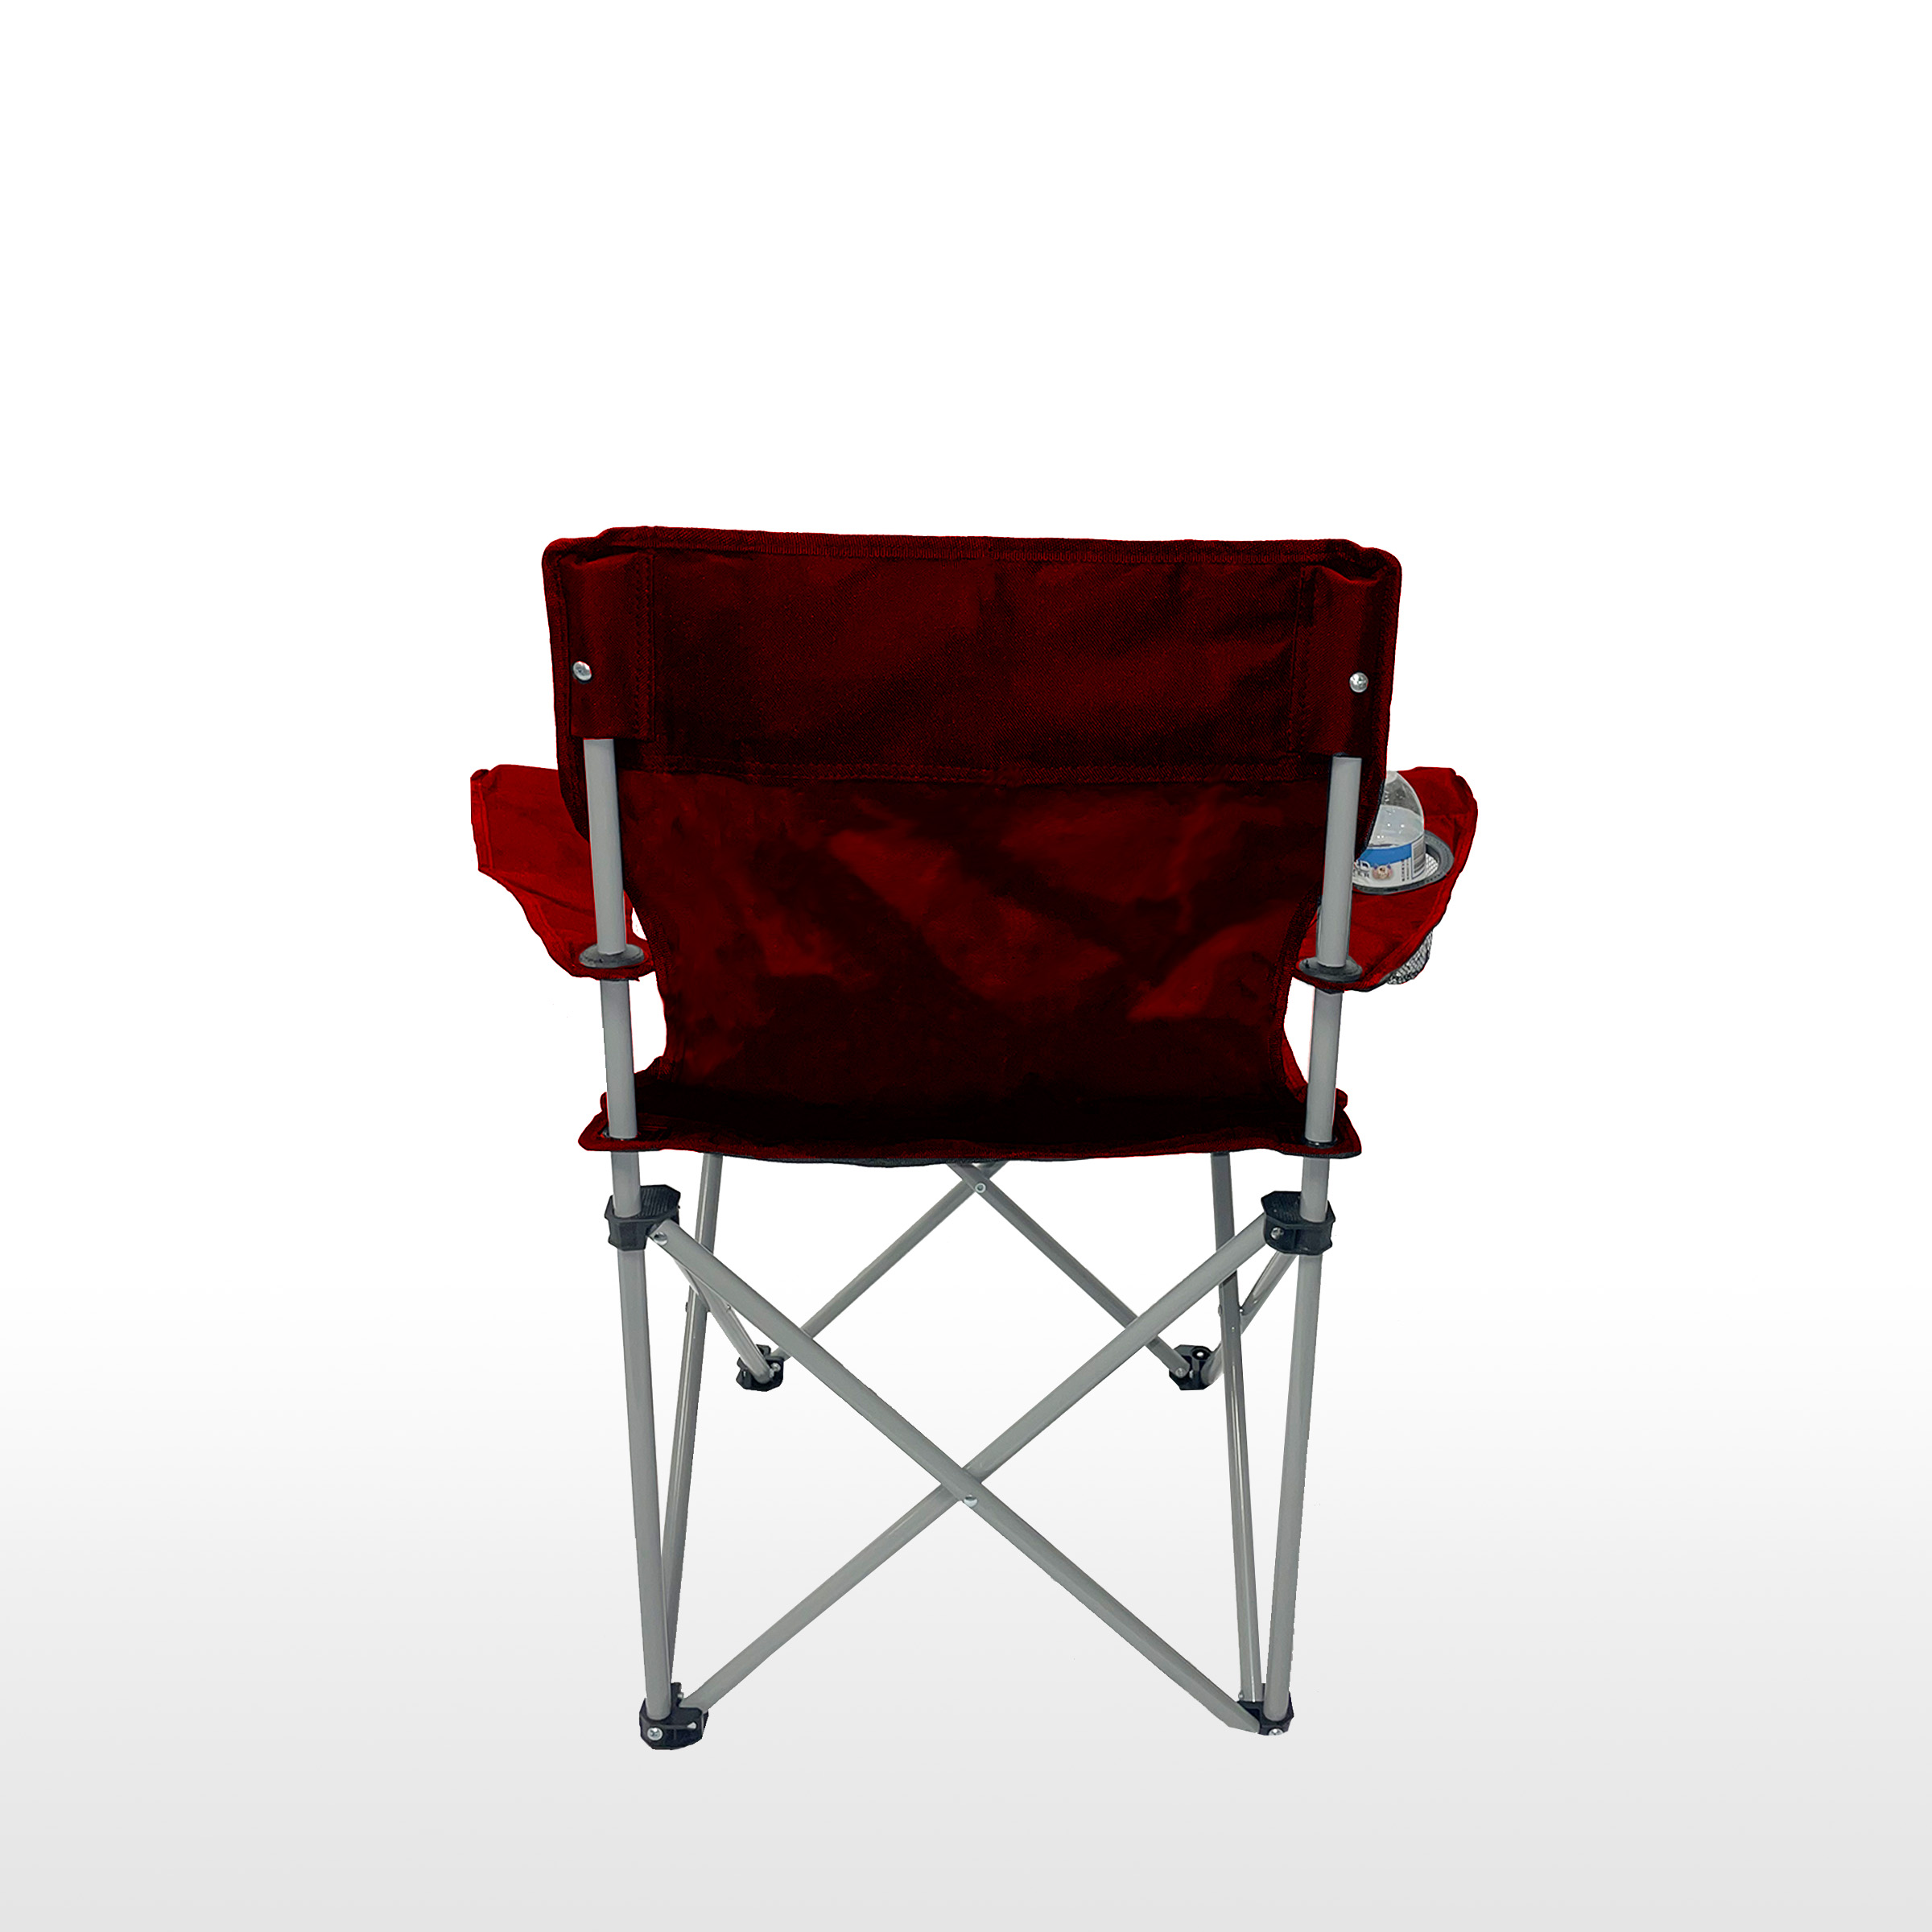 Weather Station Folding Steel Beach Chair - Red/Gray - image 2 of 4